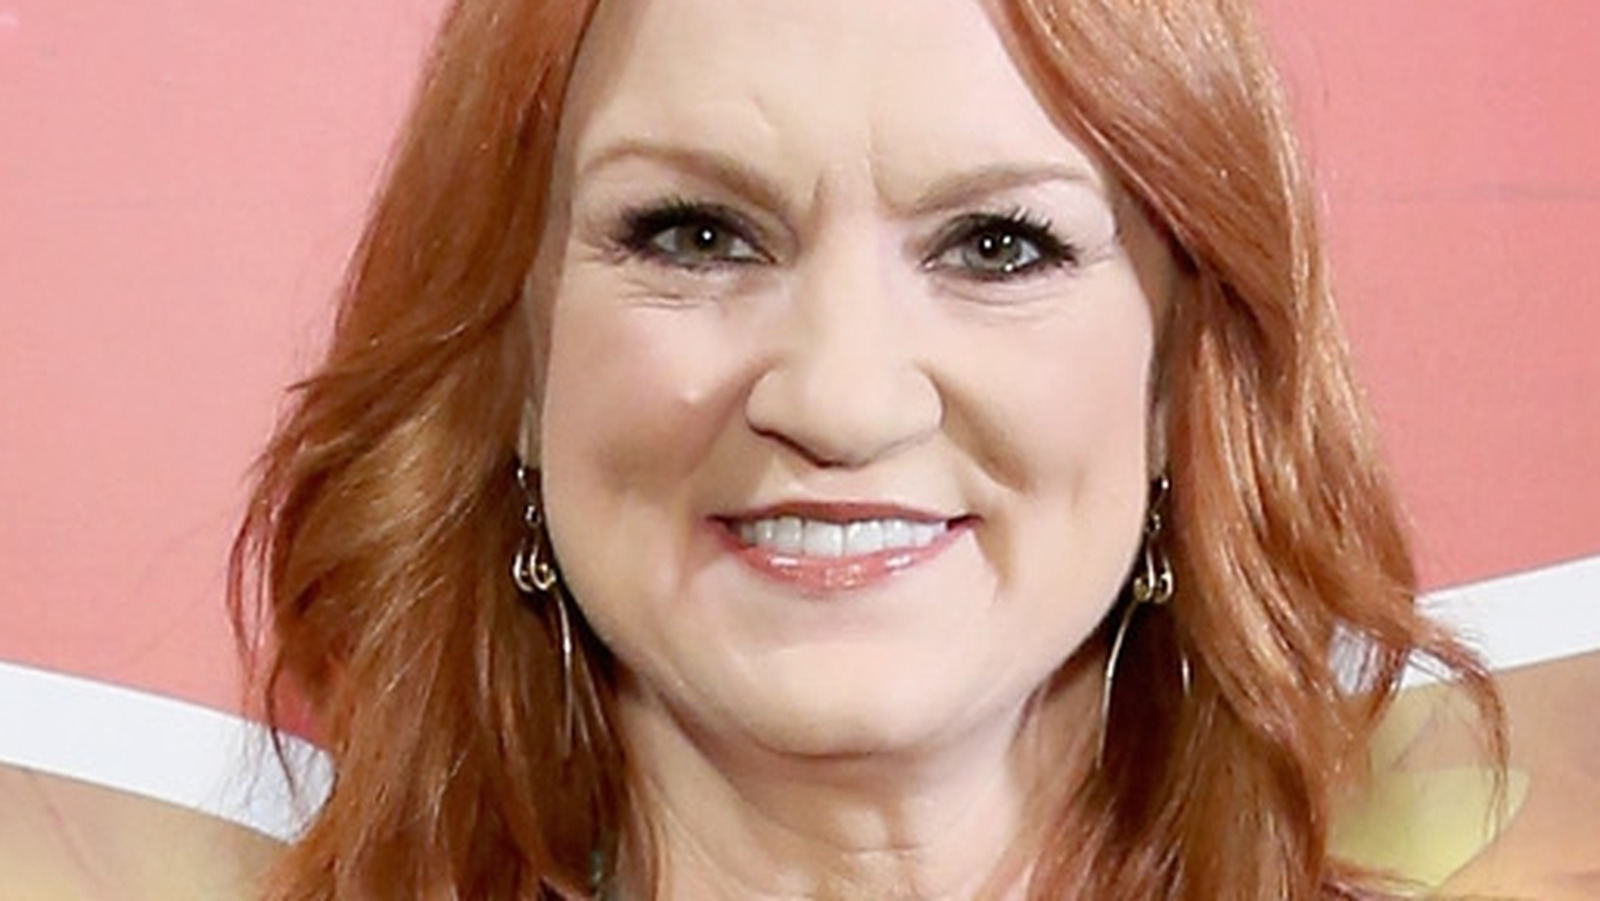 17 Facts About Ree Drummond, the Pioneer Woman — Eat This Not That